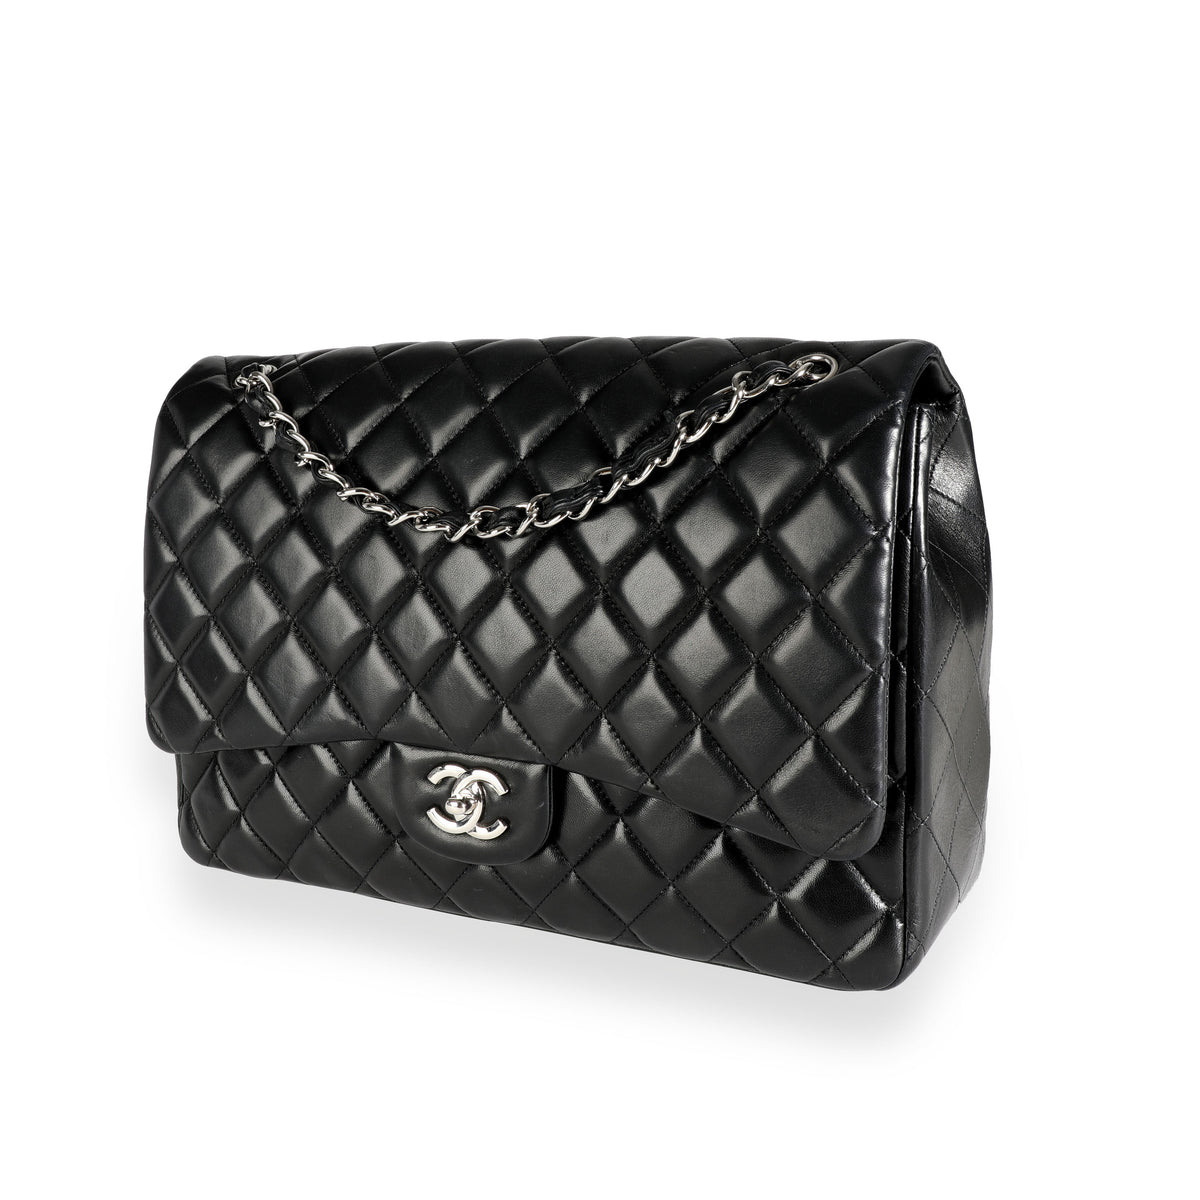 Chanel Black Quilted Maxi Classic Single Flap Bag, myGemma